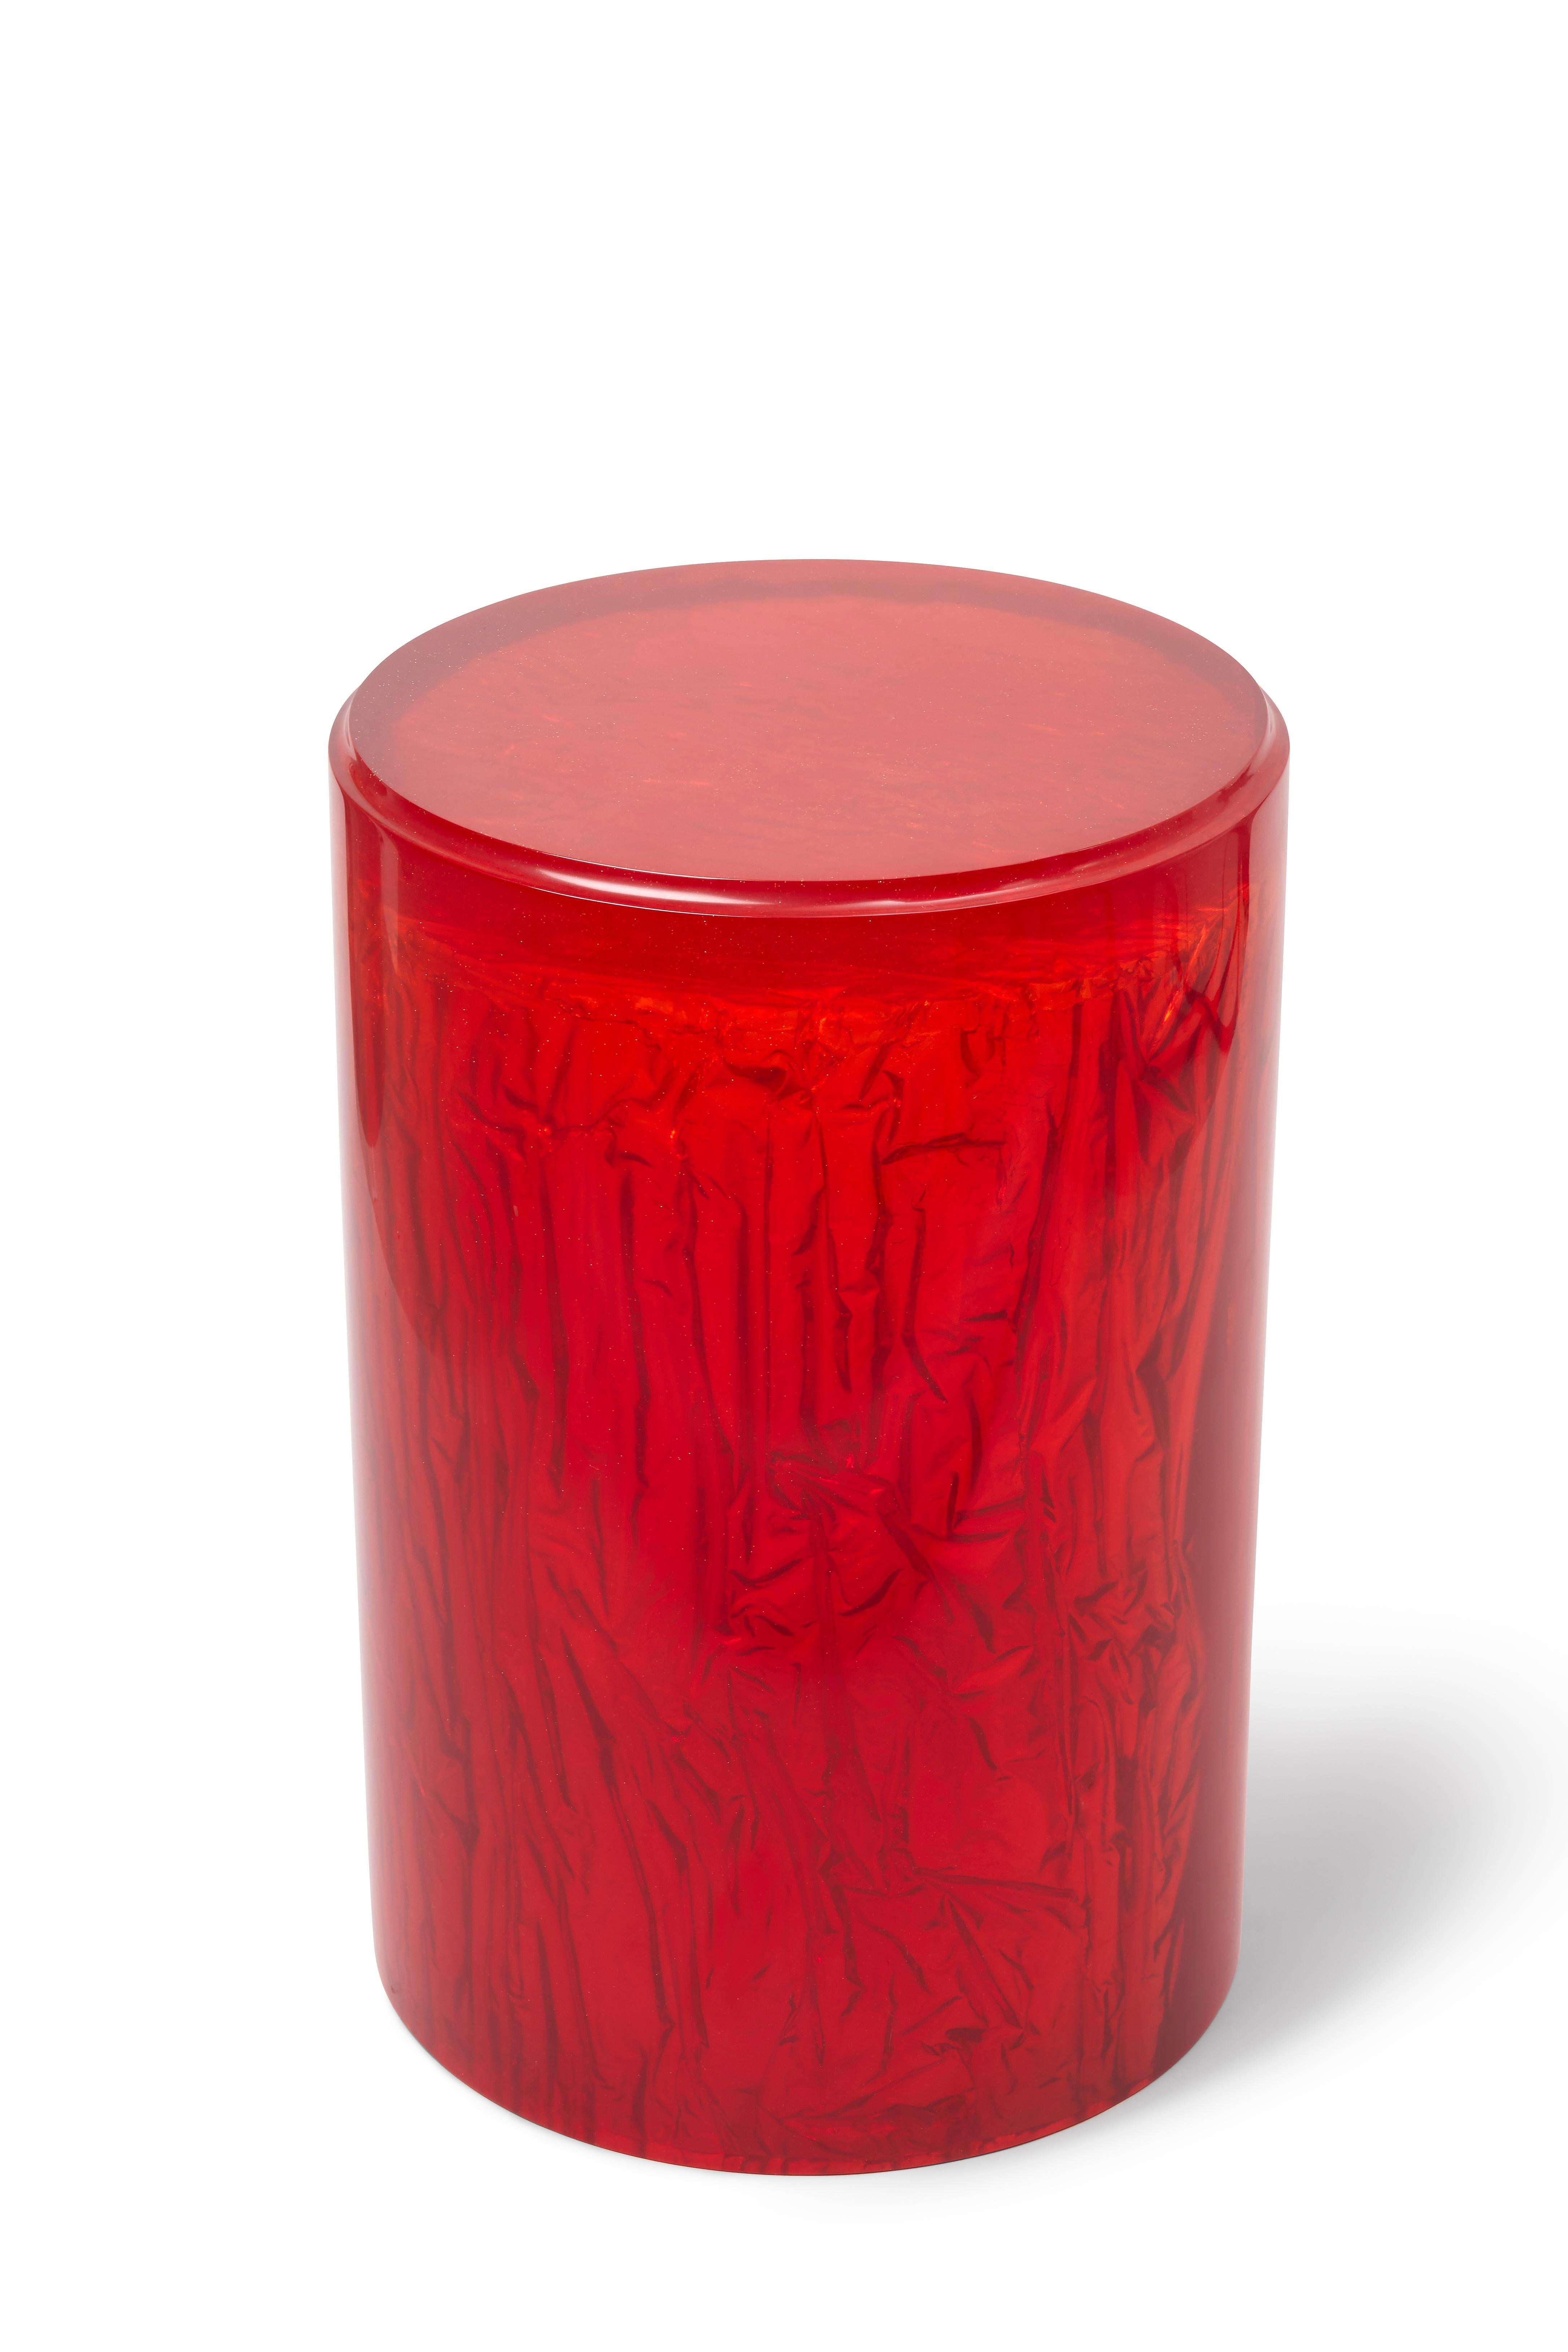 Cast Contemporary Resin Acrylic Side Table or Stool by Natalie Tredgett, gloss, Red For Sale